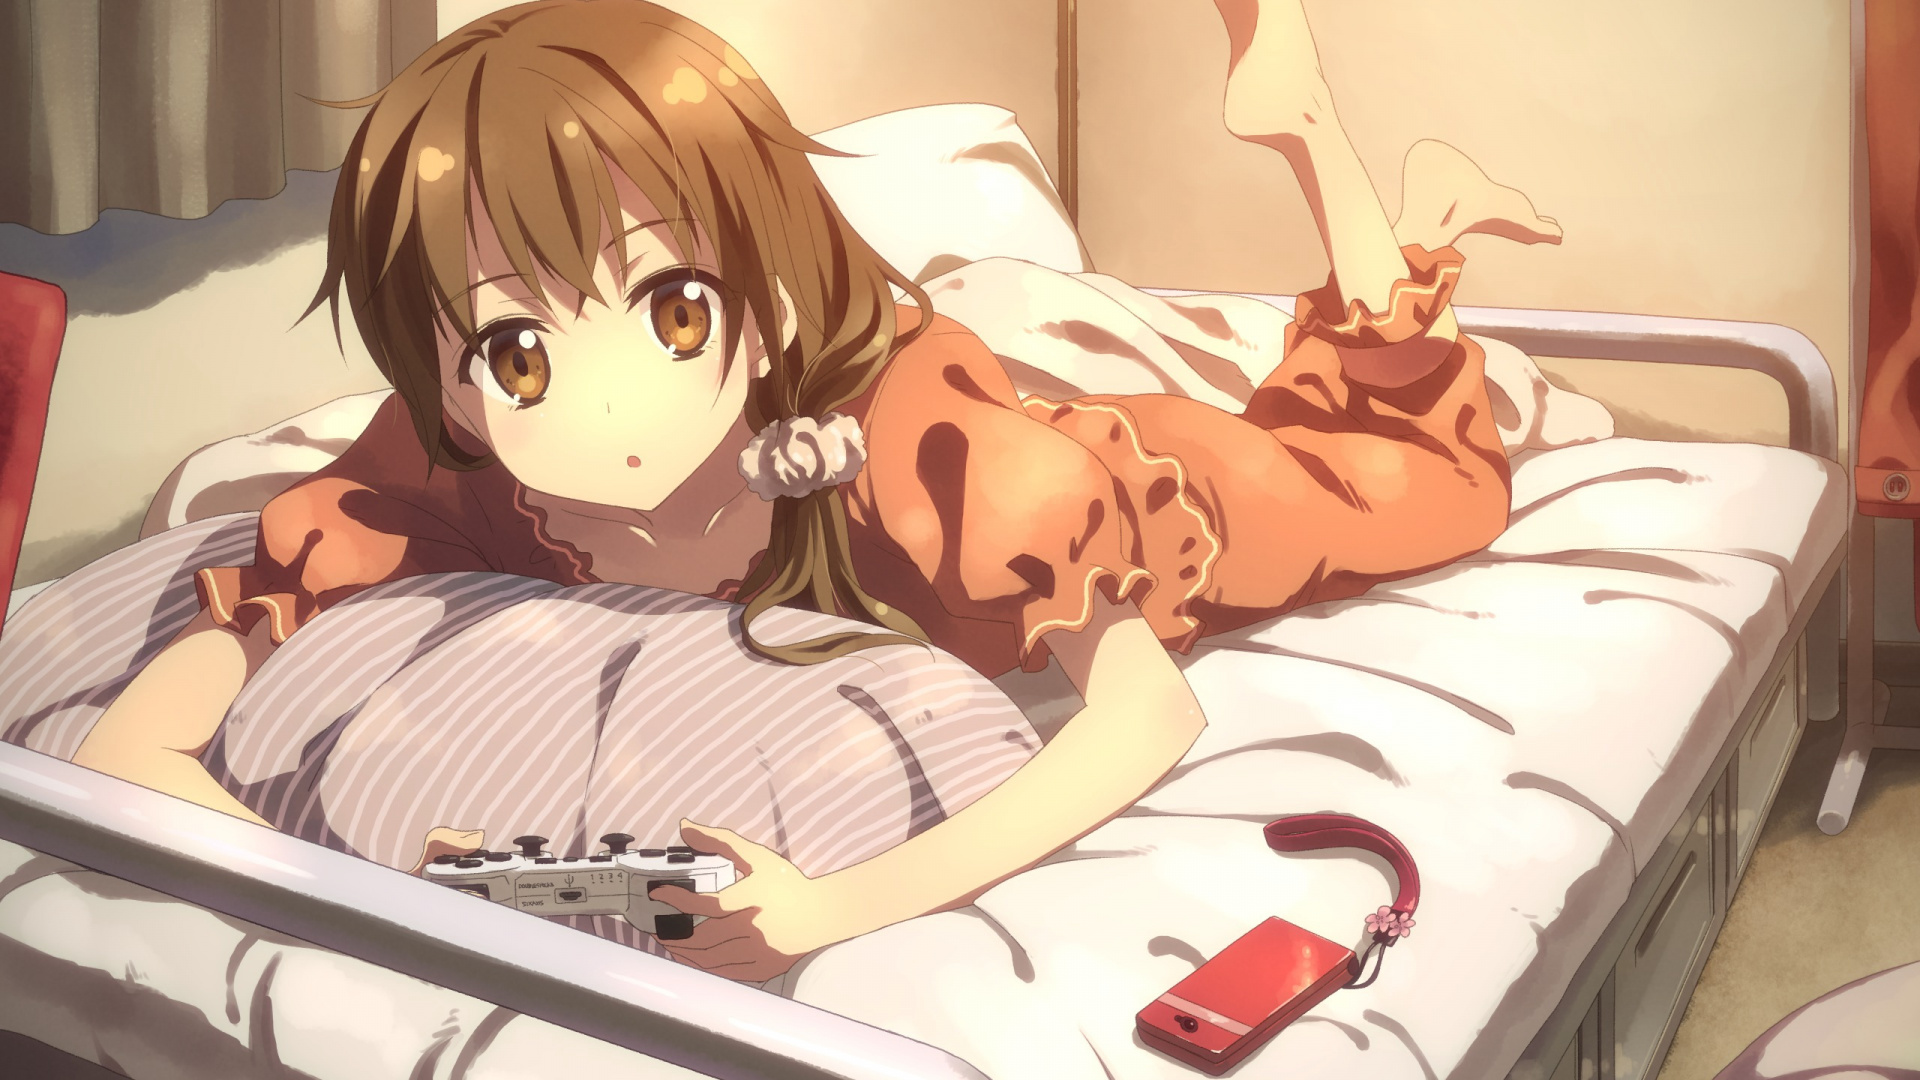 Brown Haired Girl Anime Character Lying on Bed. Wallpaper in 1920x1080 Resolution